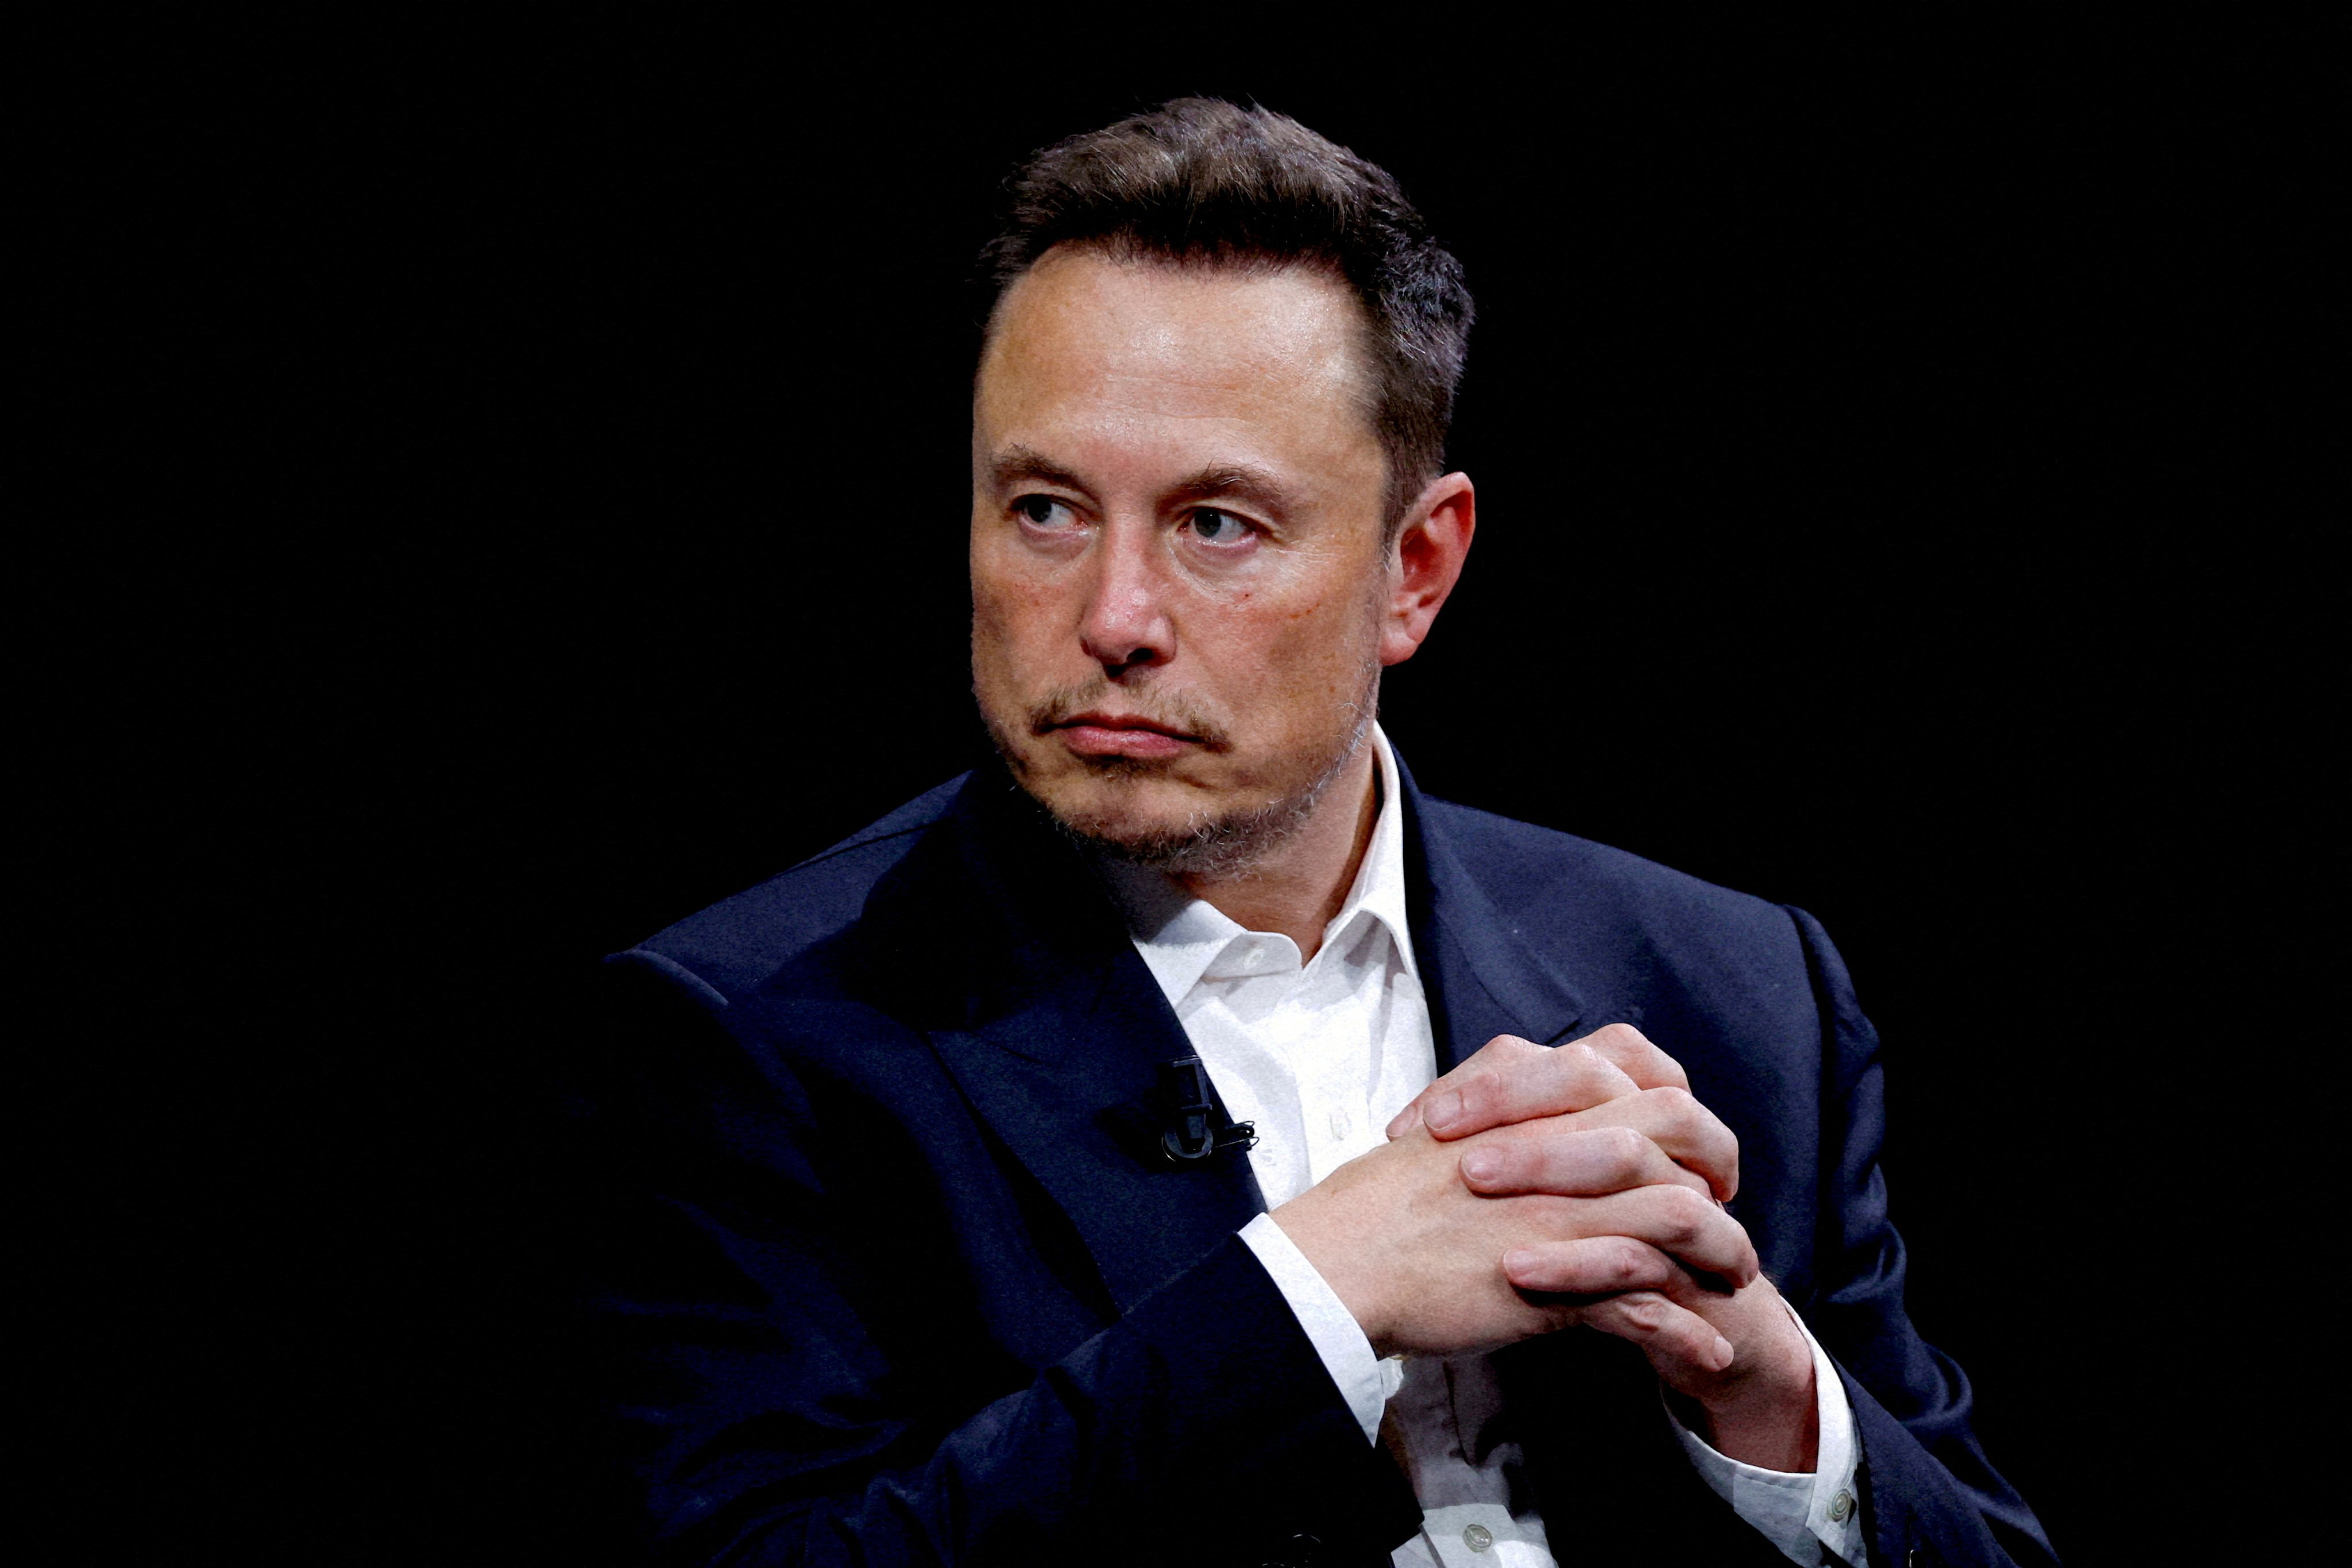 Elon Musk has ordered Tesla's biggest lay-offs ever and staked its future on a next-generation, self-driving vehicle concept called the robotaxi, unsettling many at the company. Photo: Reuters